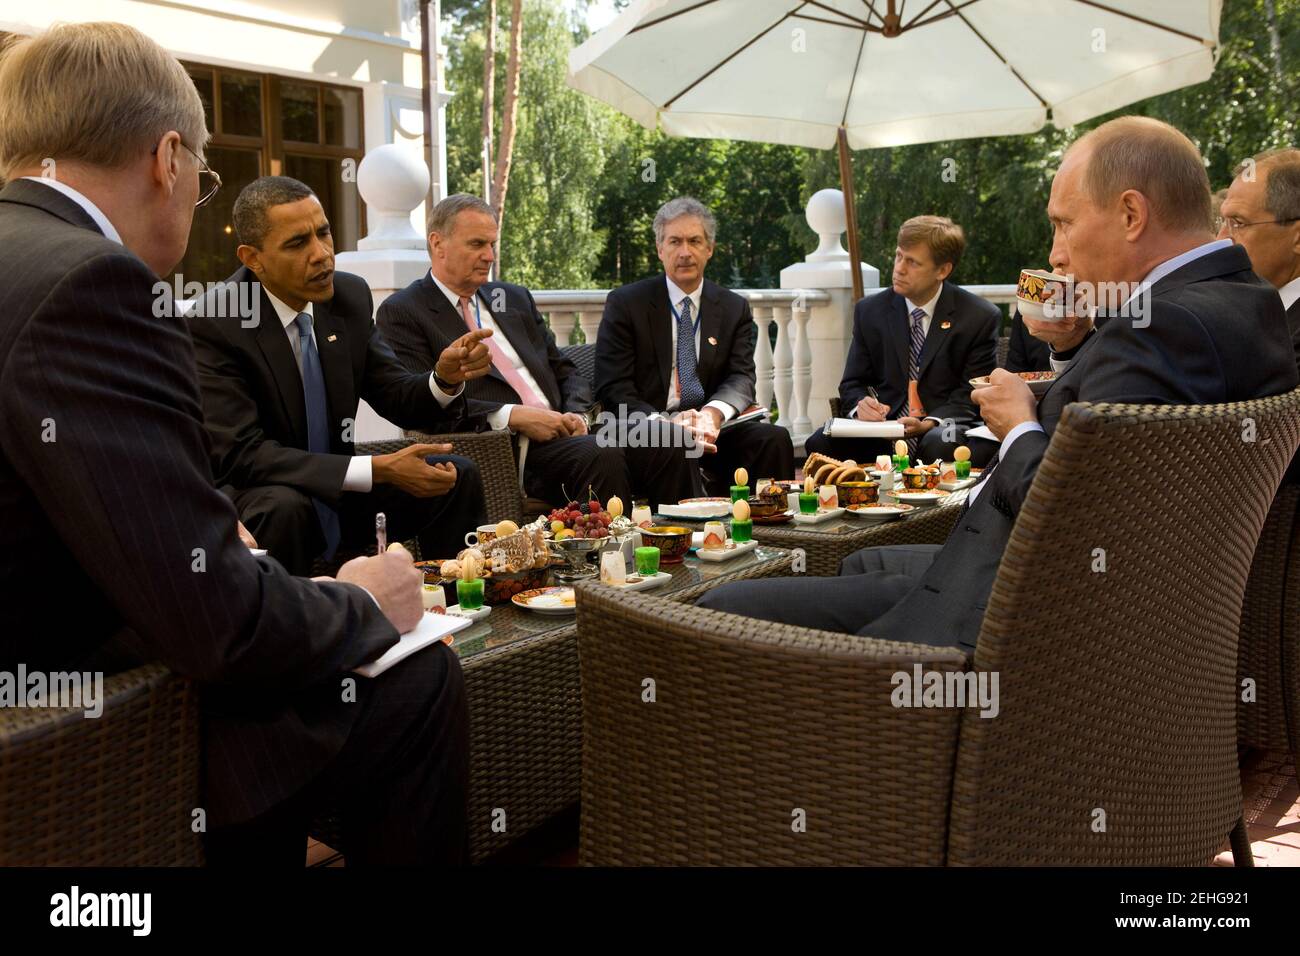 President Barack Obama and members of the American delegation, including National Security Advisor General Jim Jones, Under Secretary for Political Affairs Bill Burns, and NSC Senior Director for Russian Affairs Mike McFaul, meet with Prime Minister Vladimir Putin at his dacha outside Moscow, Russia, July 7, 2009. Stock Photo